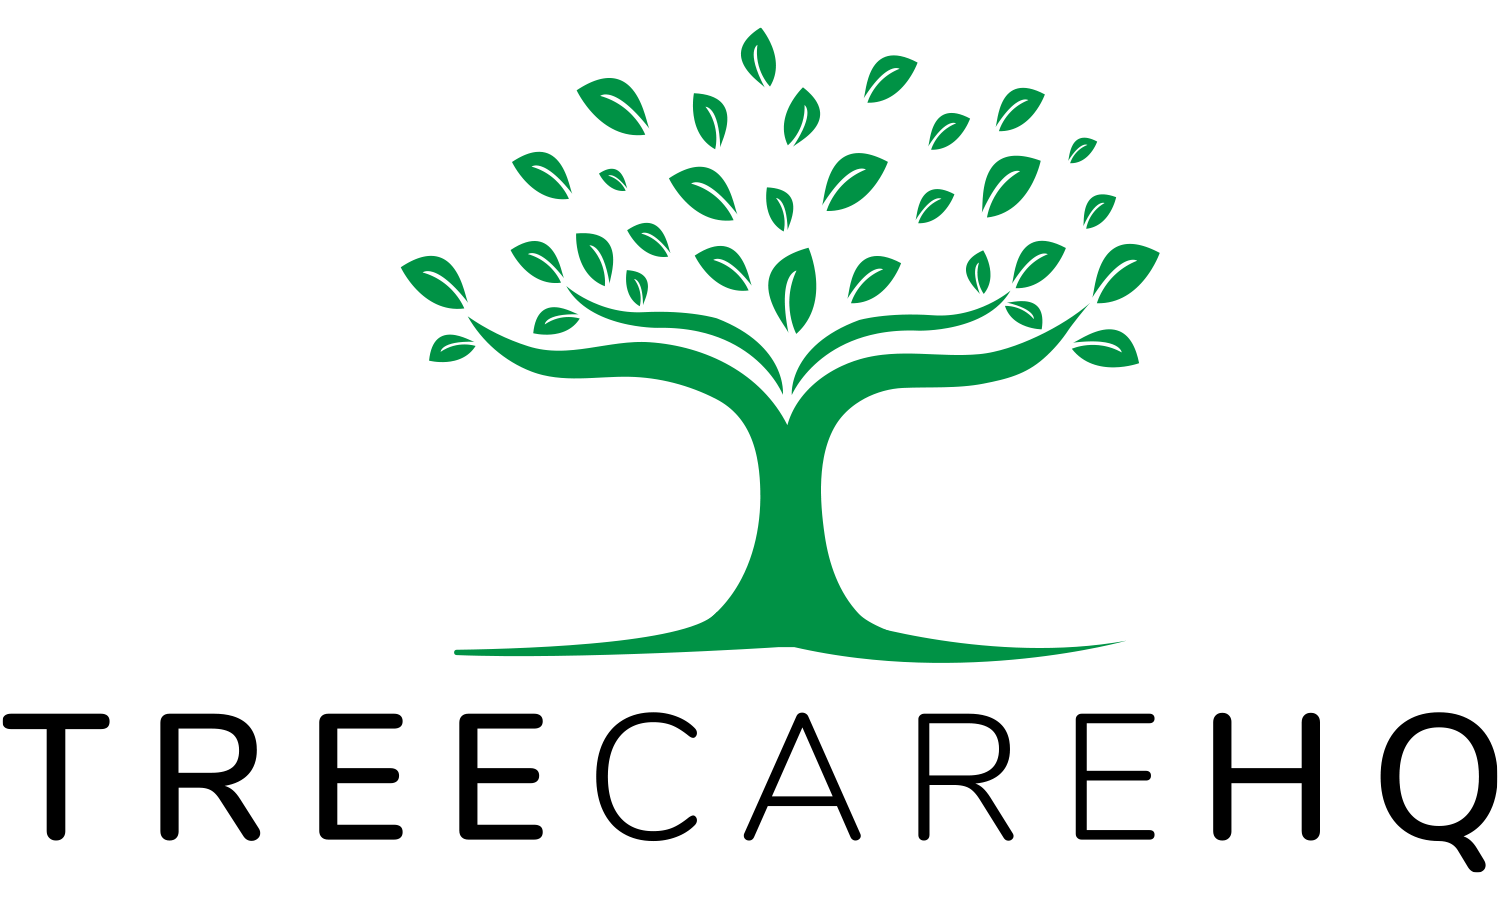 img/tree-care-hq-logo-tr-dk-text-1500x900.png